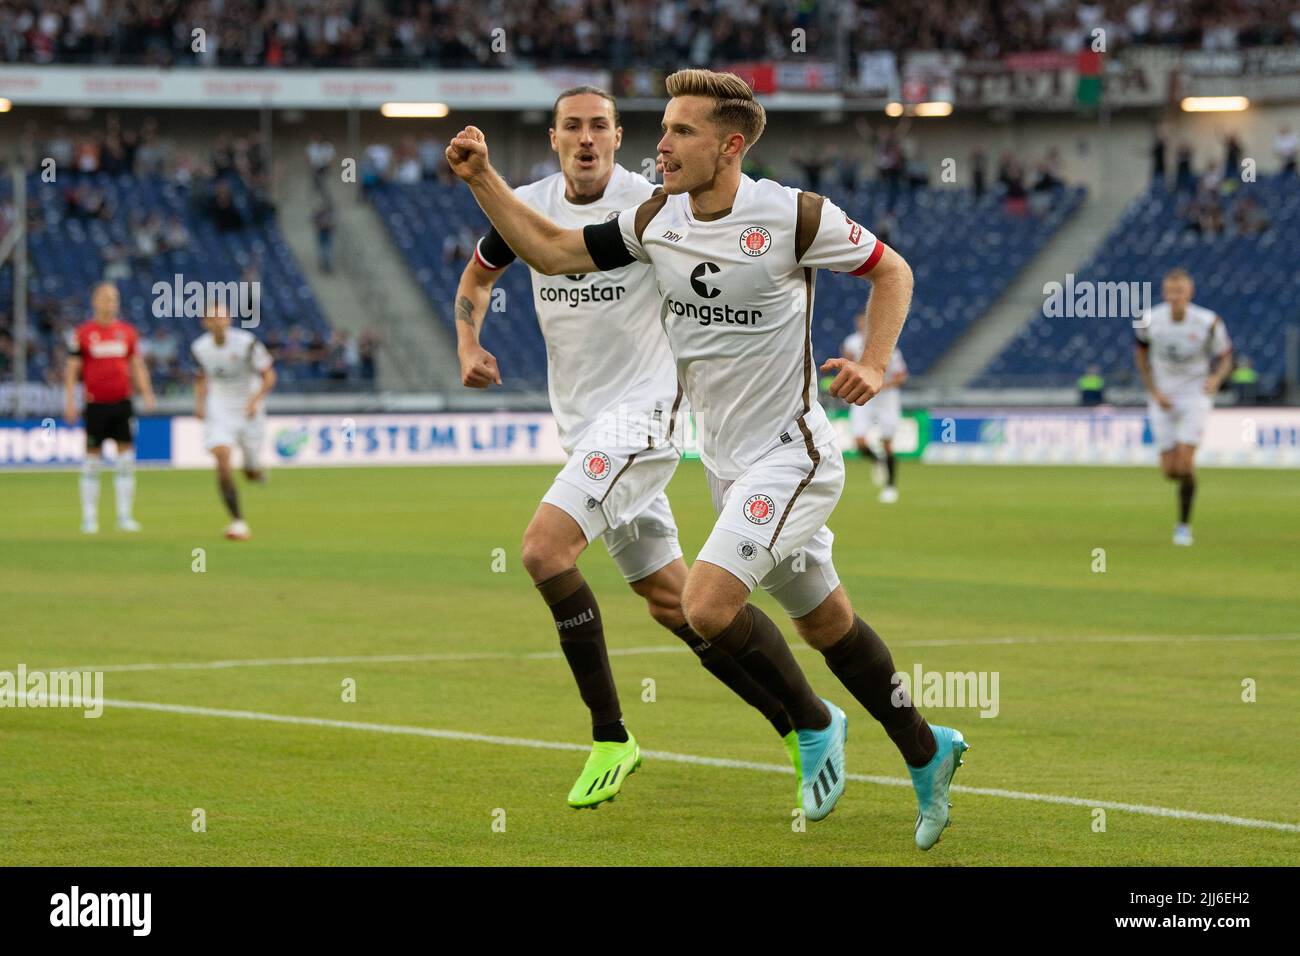 Hanover, Germany. 23rd July, 2022. Soccer: 2nd Bundesliga, Hannover 96 - FC St. Pauli, Matchday 2, Heinz von Heiden Arena. St. Pauli's Johannes Eggestein celebrates after his goal to make it 0:1. Credit: Swen Pförtner/dpa - IMPORTANT NOTE: In accordance with the requirements of the DFL Deutsche Fußball Liga and the DFB Deutscher Fußball-Bund, it is prohibited to use or have used photographs taken in the stadium and/or of the match in the form of sequence pictures and/or video-like photo series./dpa/Alamy Live News Stock Photo